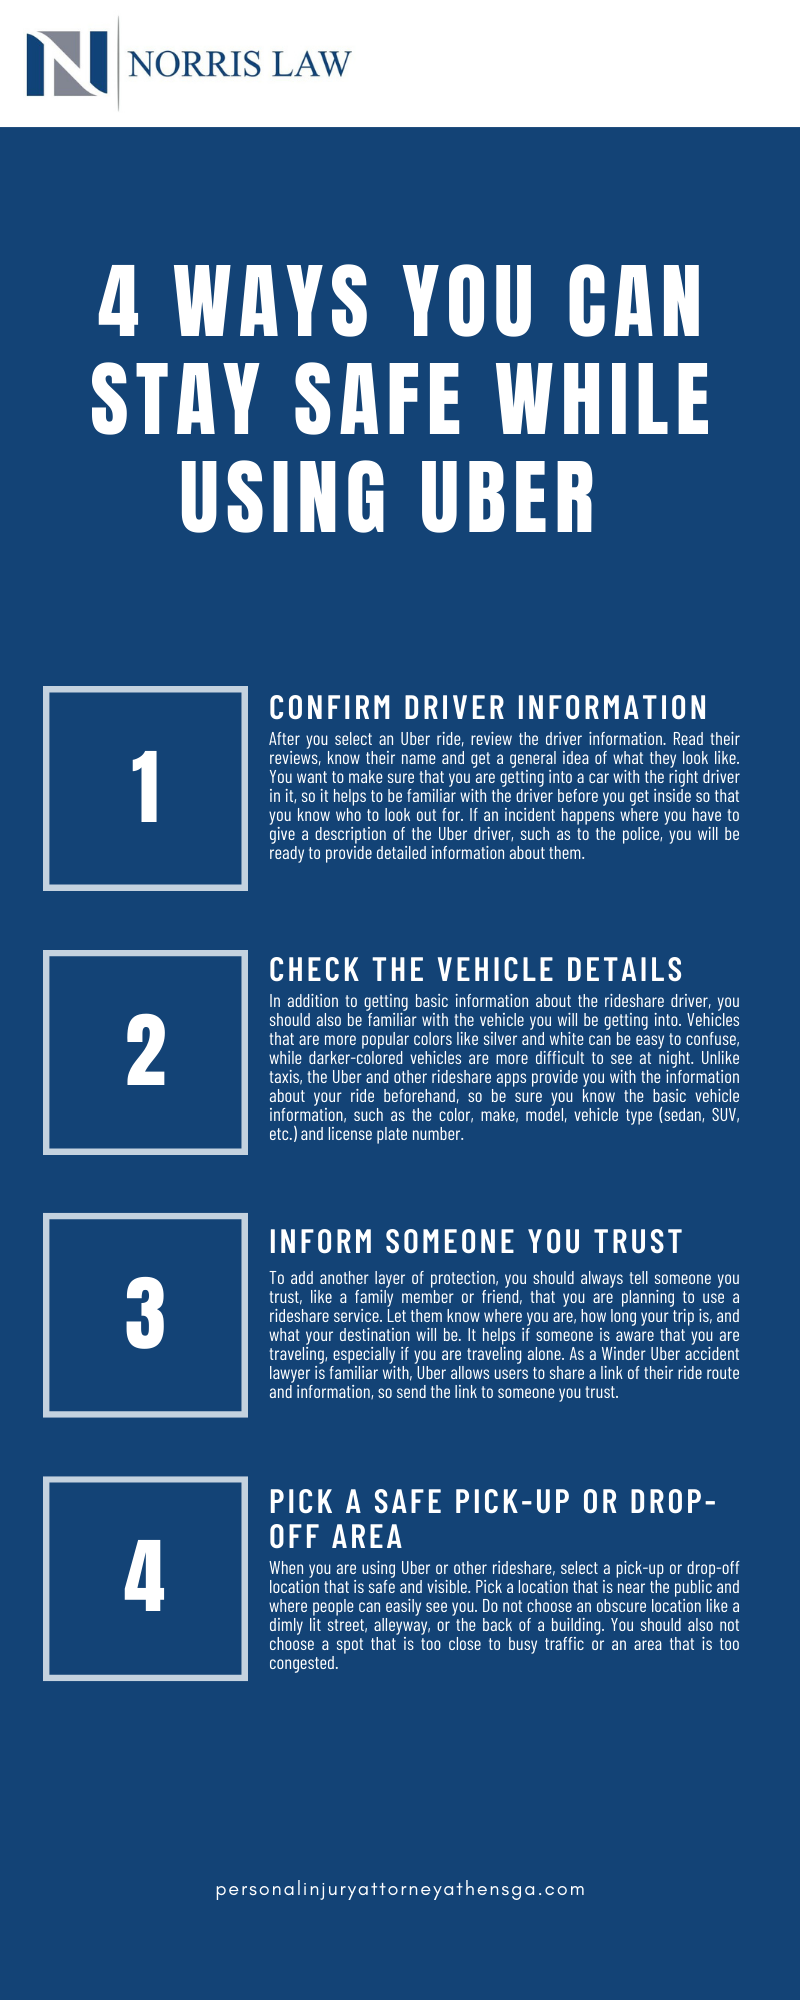 4 Ways You Can Stay Safe While Using Uber